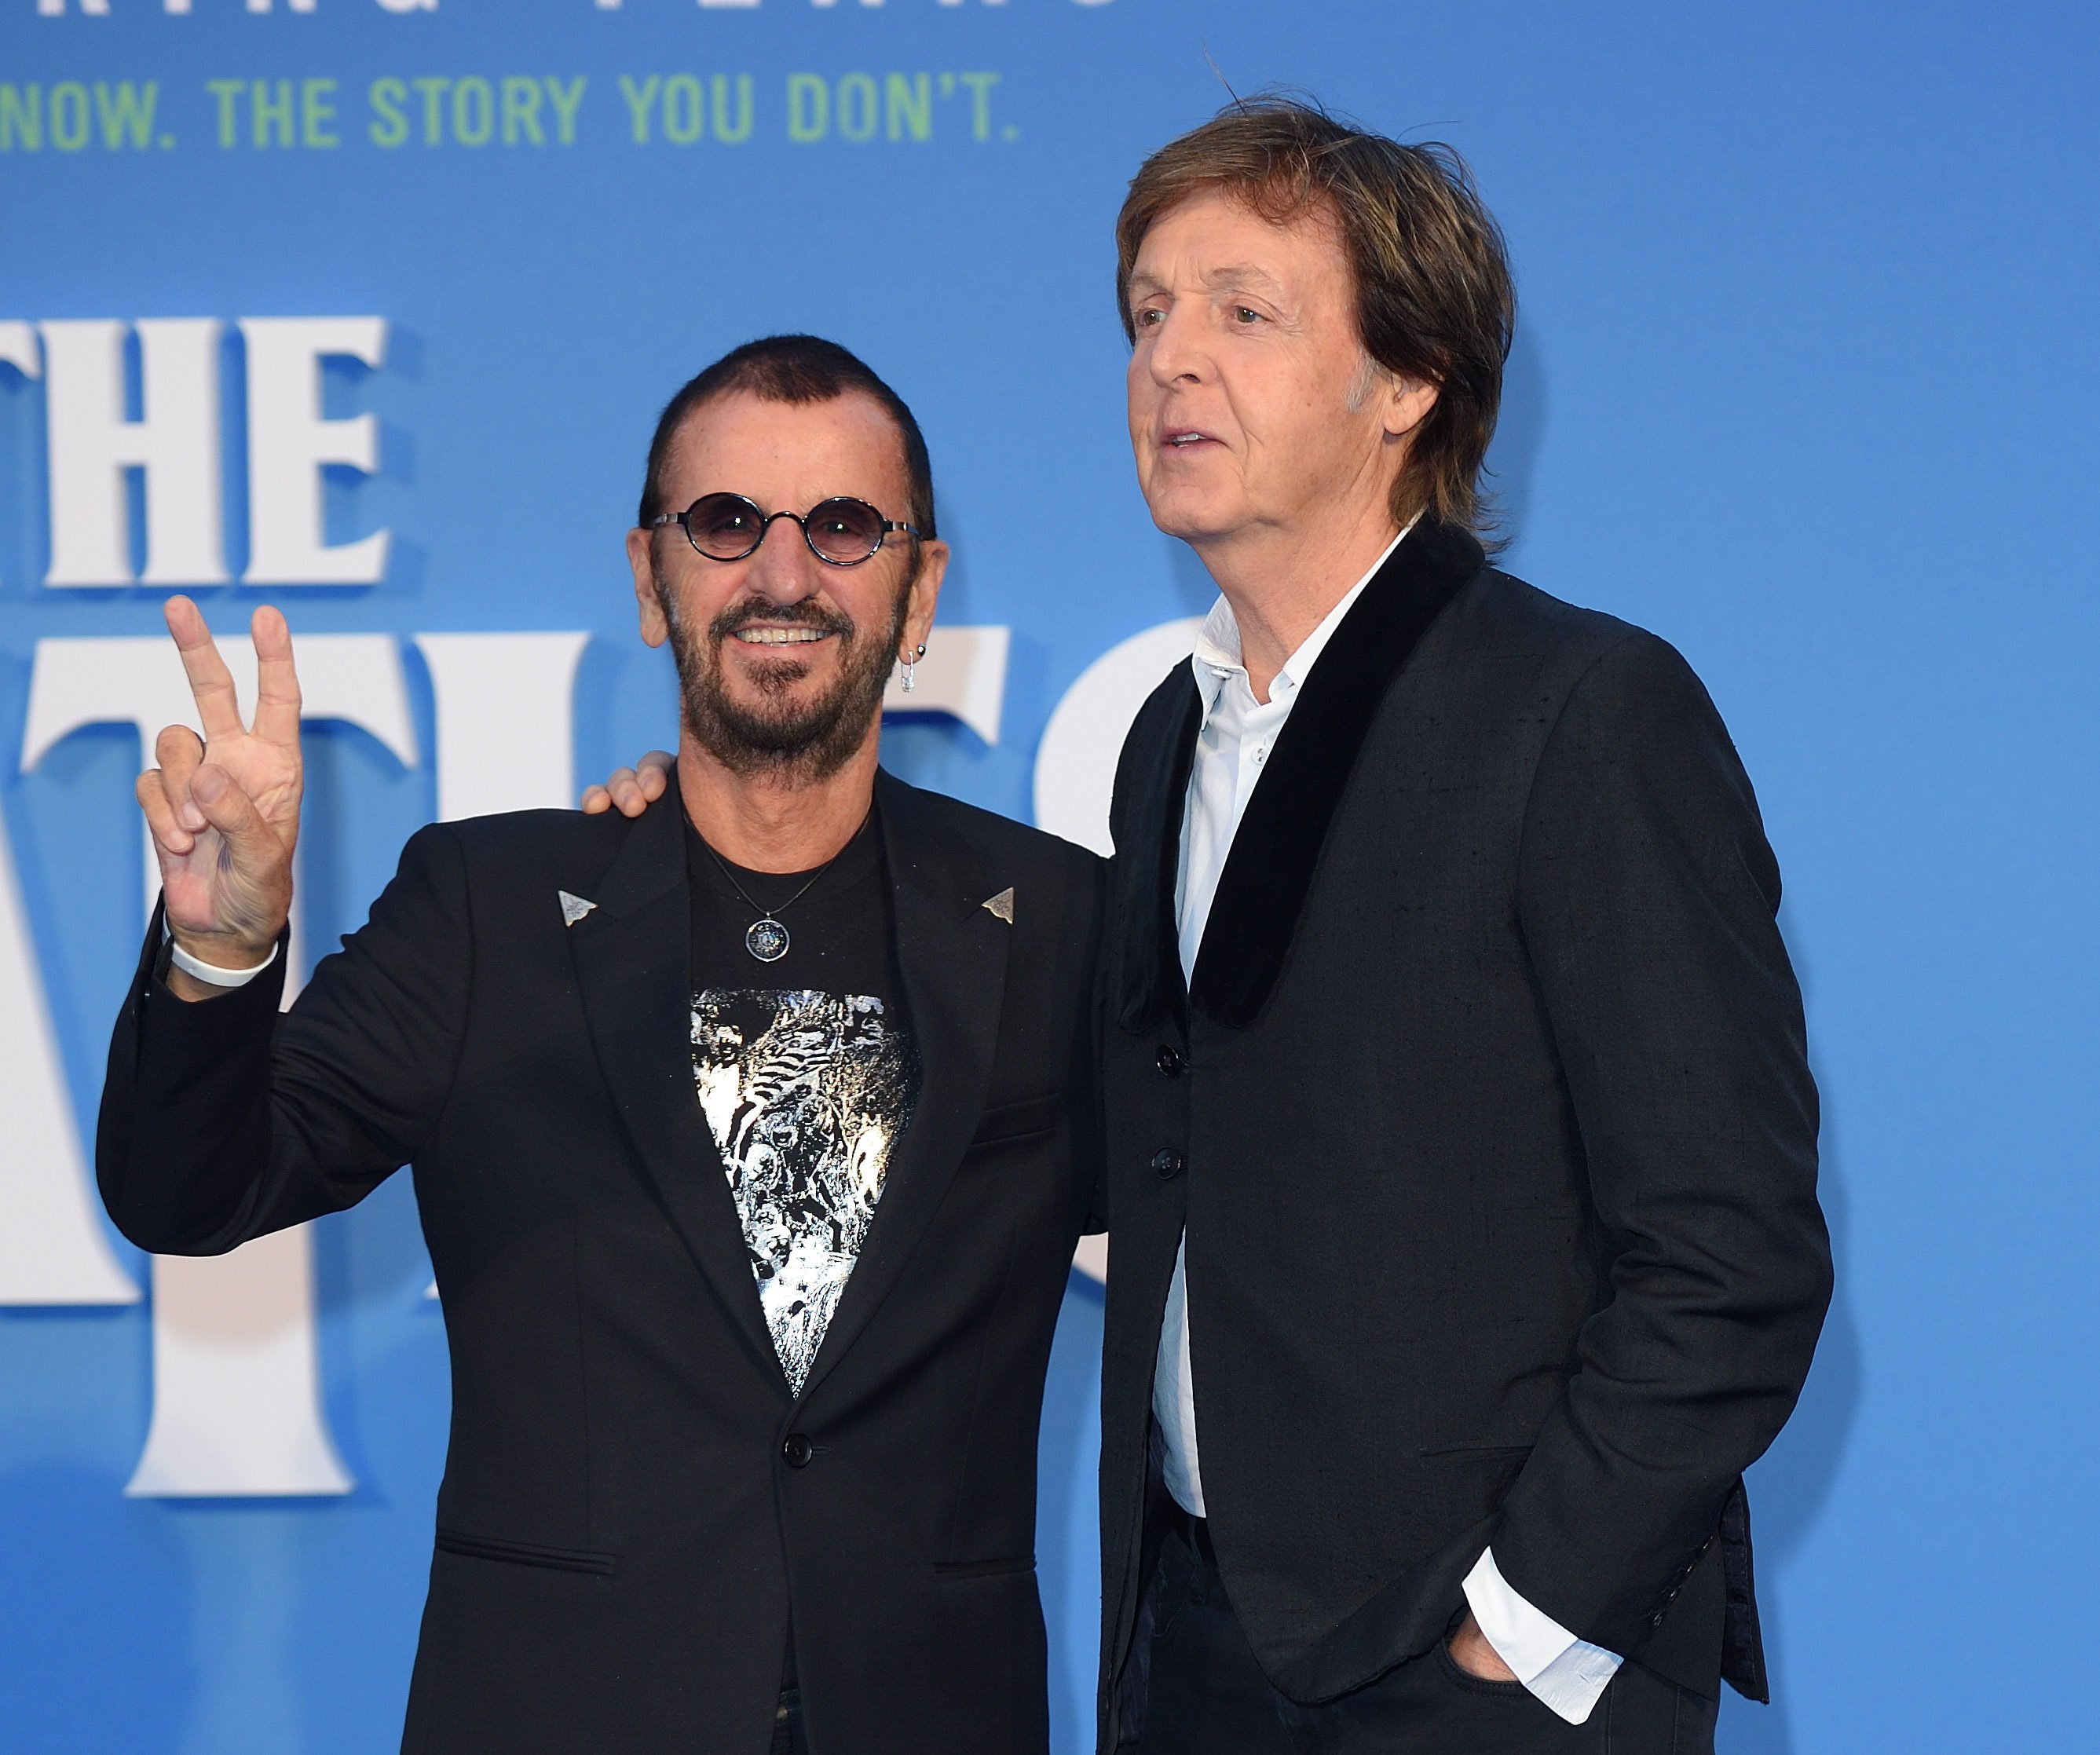 The Beatles Song That Was ‘Hard on Ringo’ to Record, According to Paul McCartney